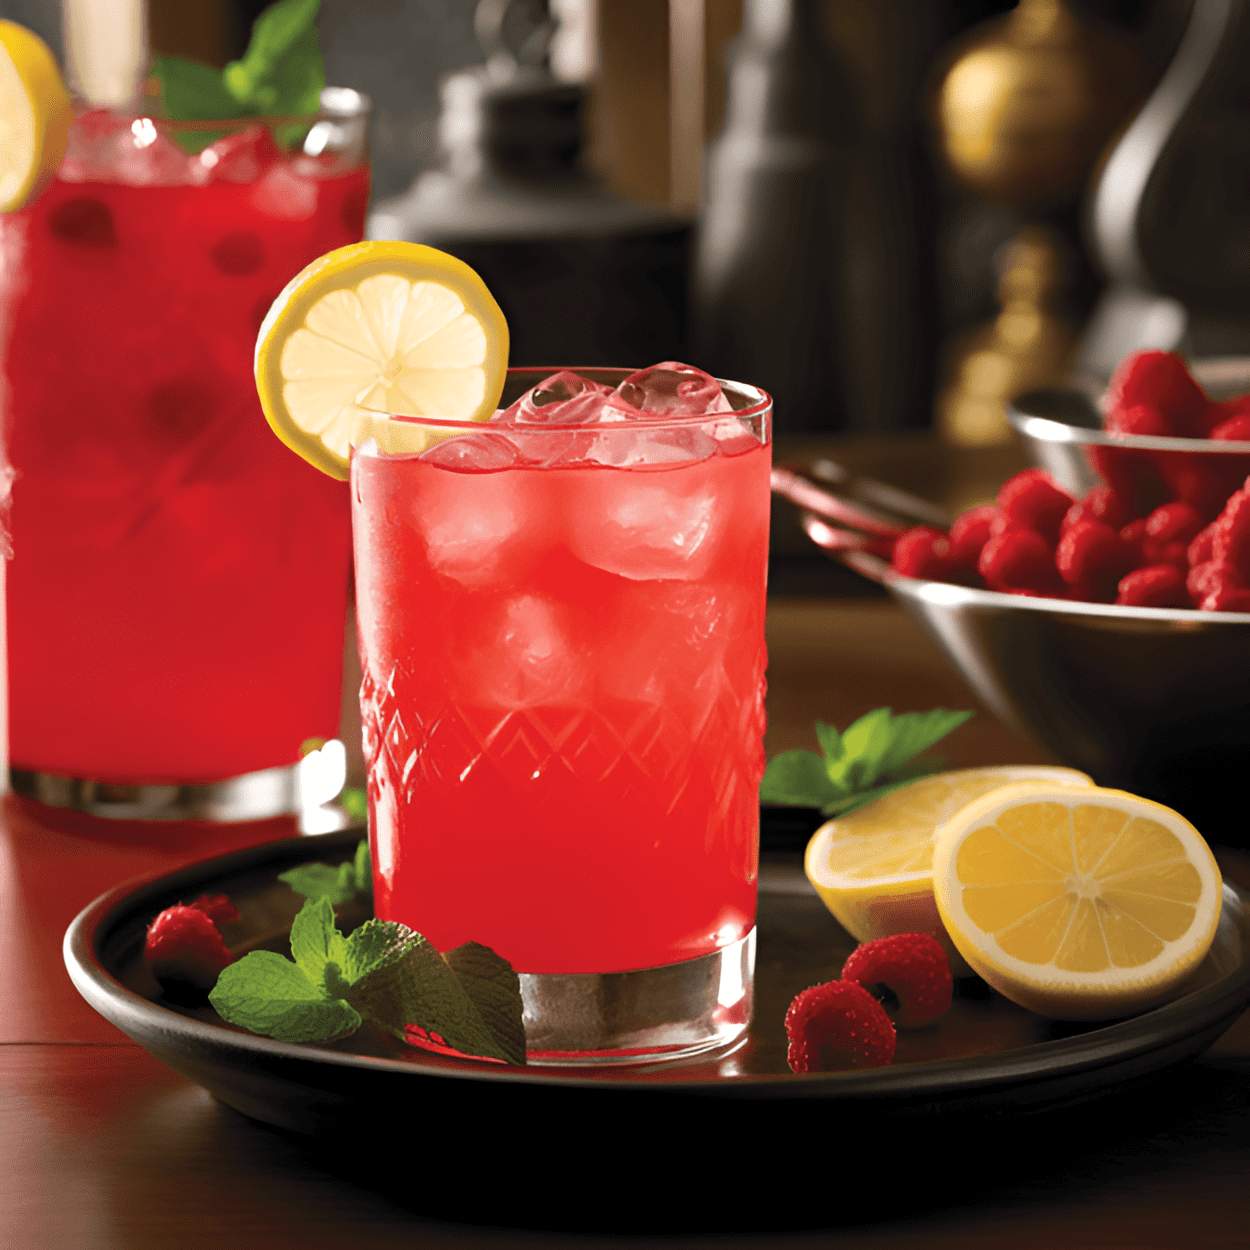 Porch Punch Cocktail Recipe - The Porch Punch cocktail is a delightful blend of sweet, sour, and fruity flavors. The sweetness of the peach schnapps and pineapple juice is perfectly balanced by the tartness of the cranberry juice and the sourness of the lemon juice. The vodka adds a strong kick, making this cocktail a refreshing and invigorating drink.